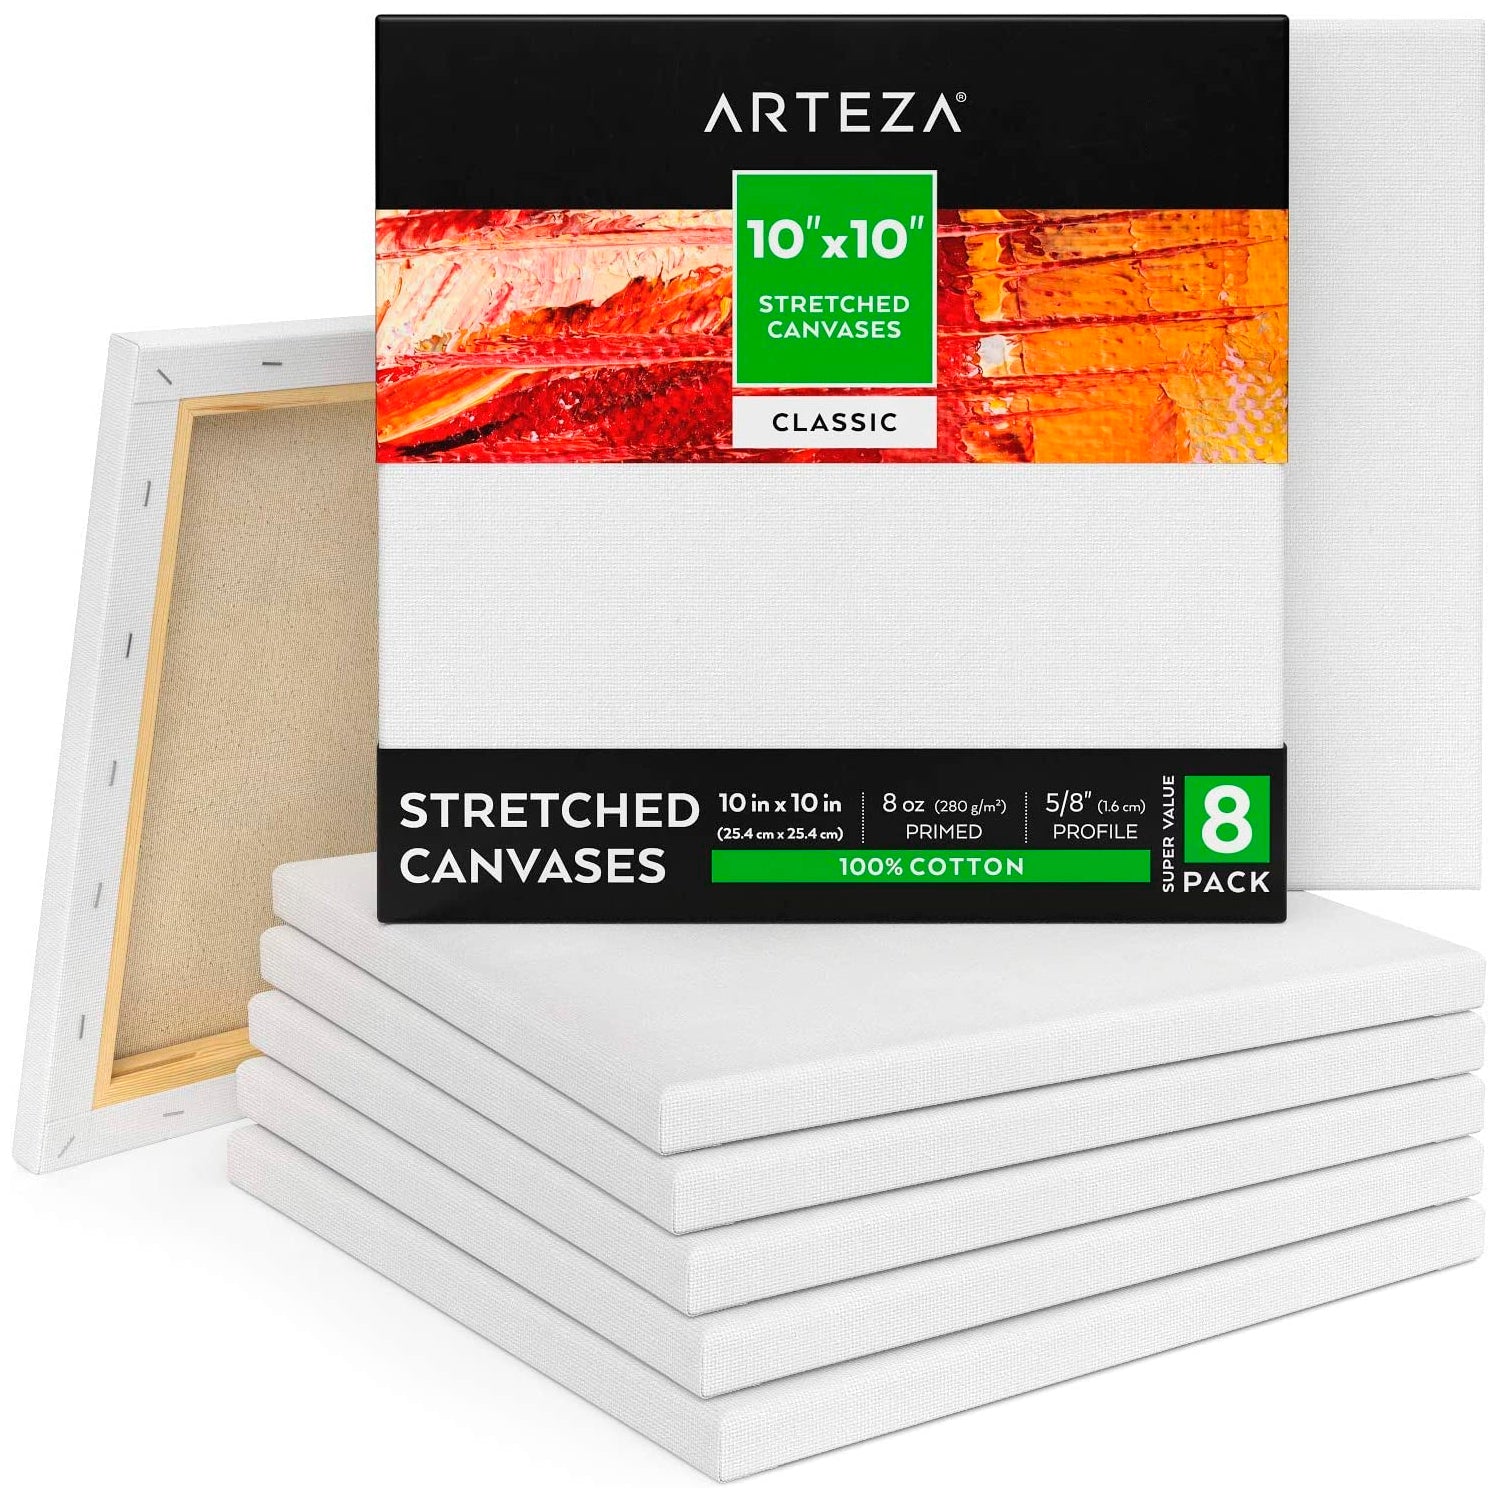 Painting Surfaces - Blank Canvases, Stretched Canvases, Artist Pads,  Painting Sheets & More